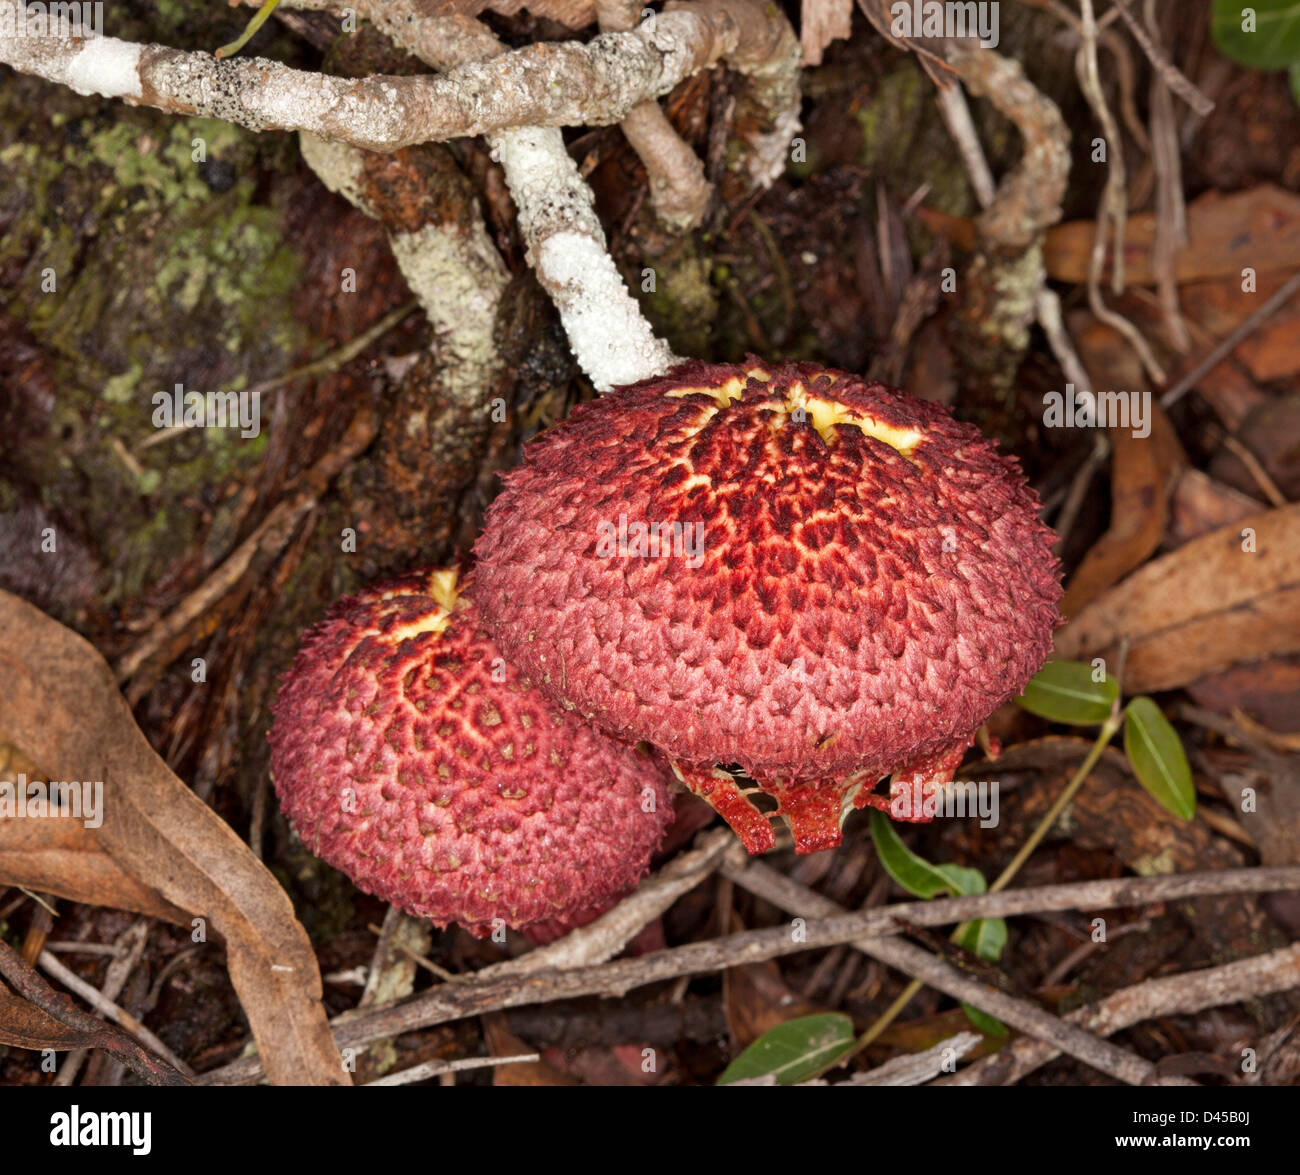 Two bright red toadstools - Boletellus ananas - Australian fungi growing among fallen leaves in woodland Stock Photo